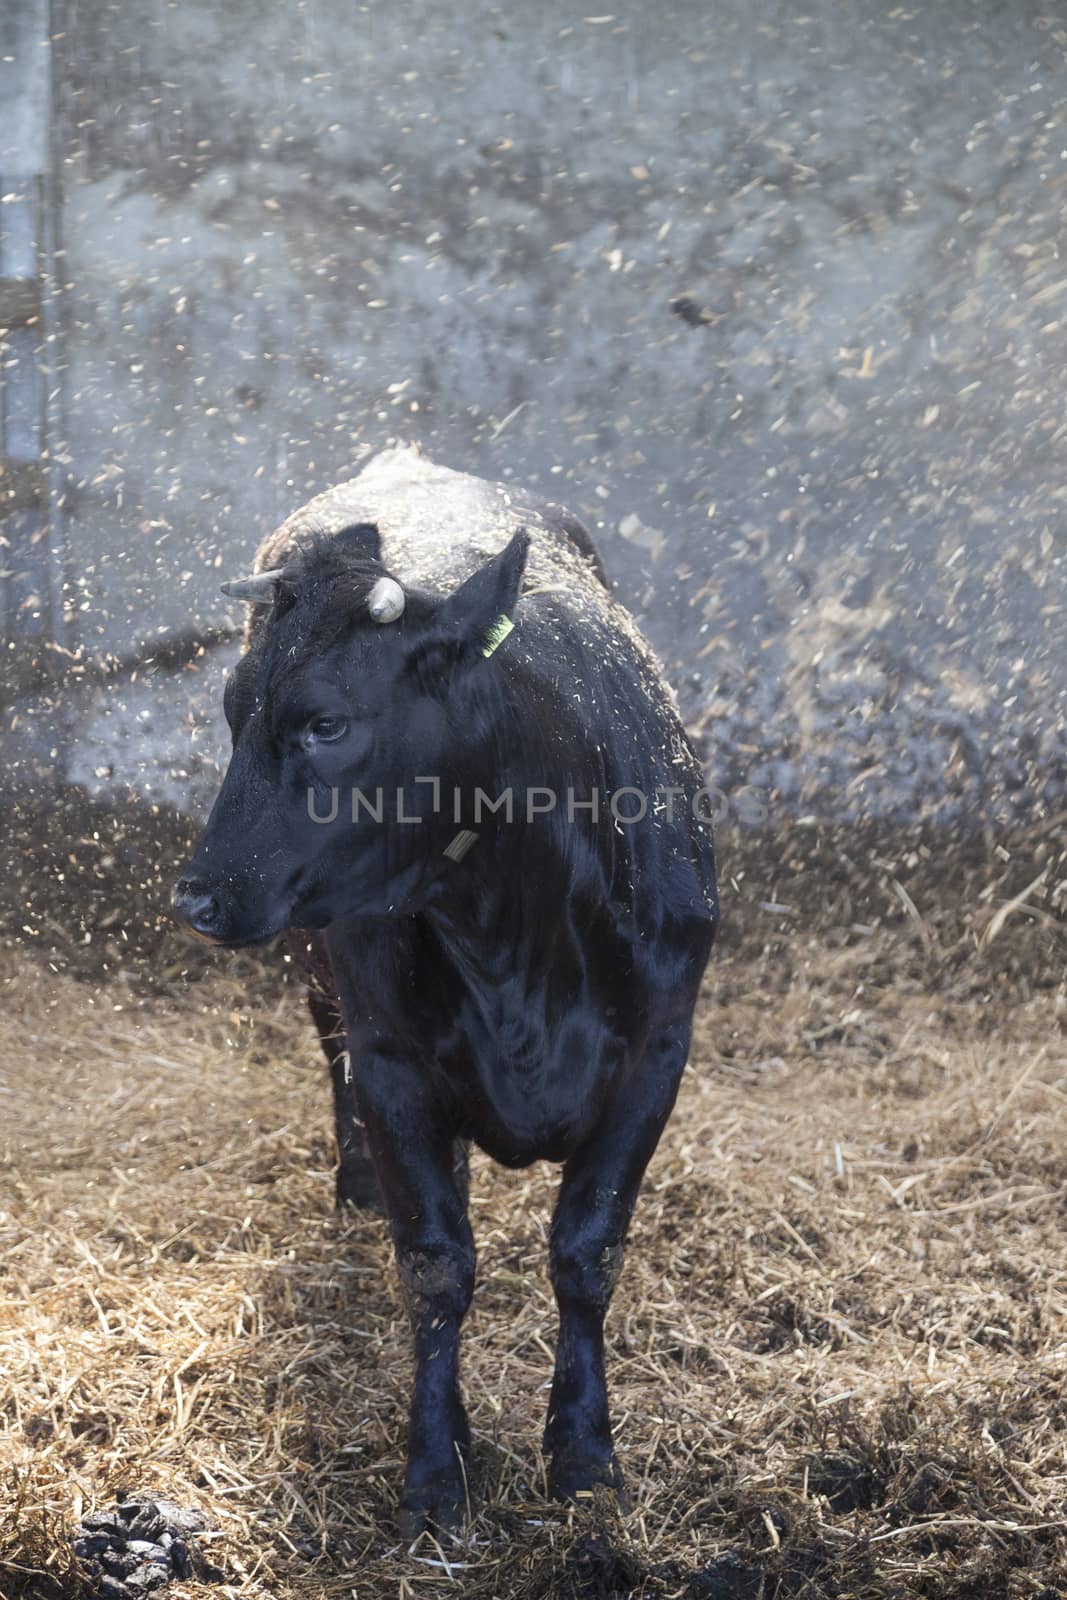 young black cow in stable with fresh straw falling from above